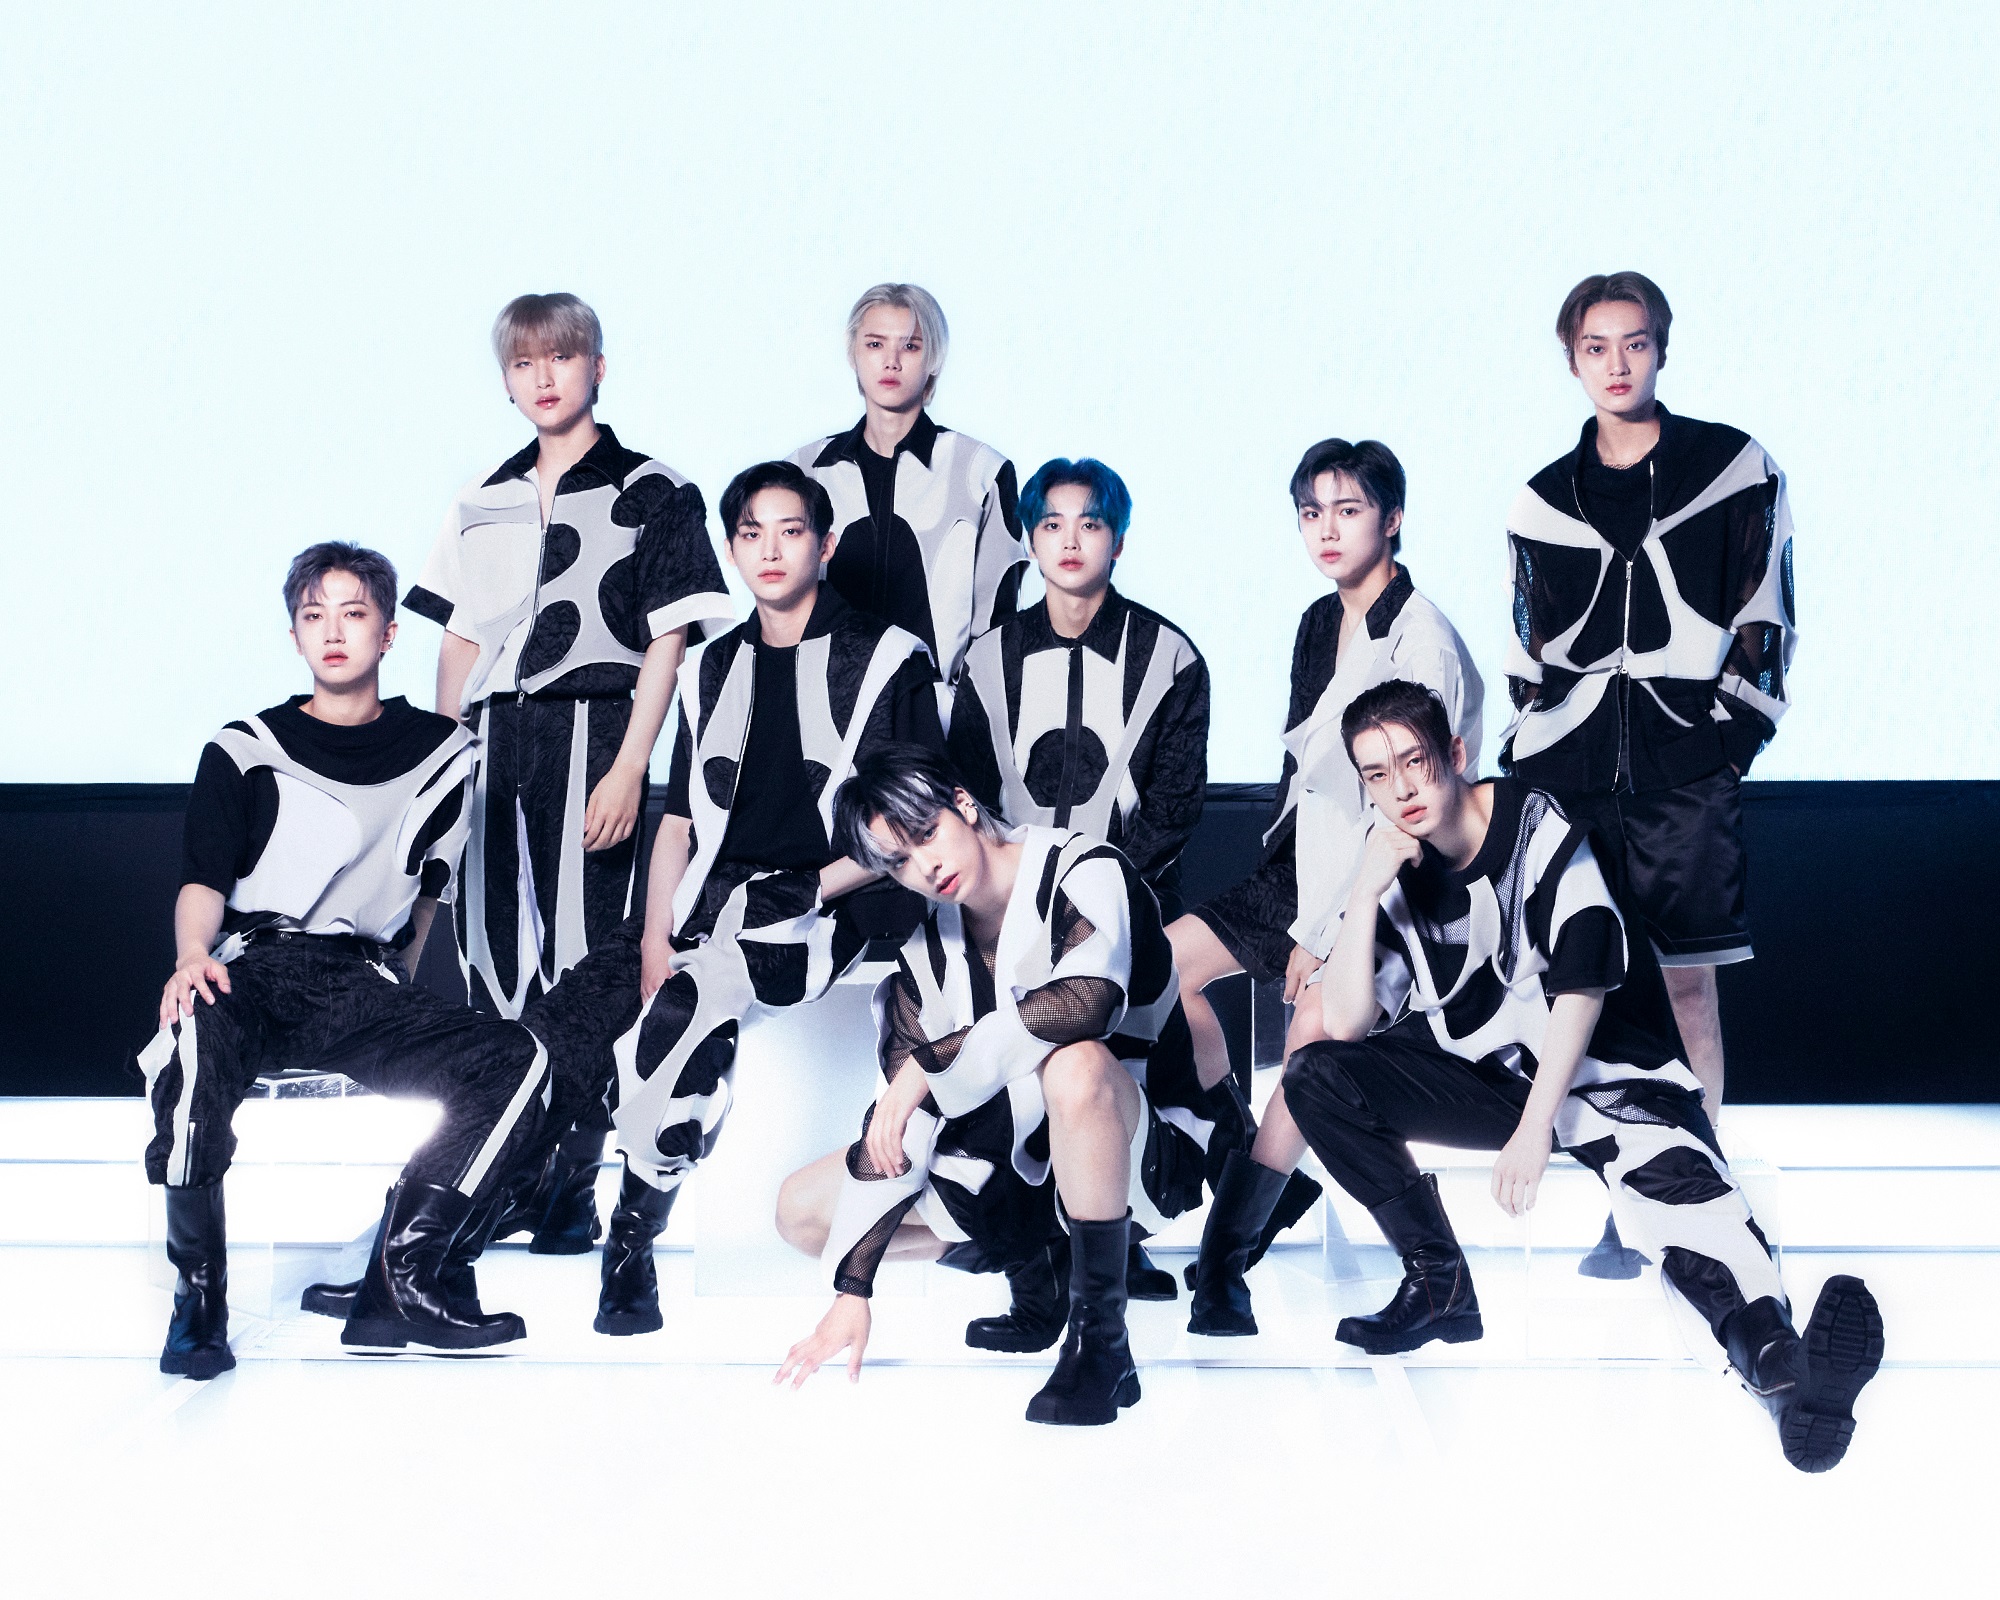 The members of CRAVITY pose in black-and-white outfits for a promotional photo